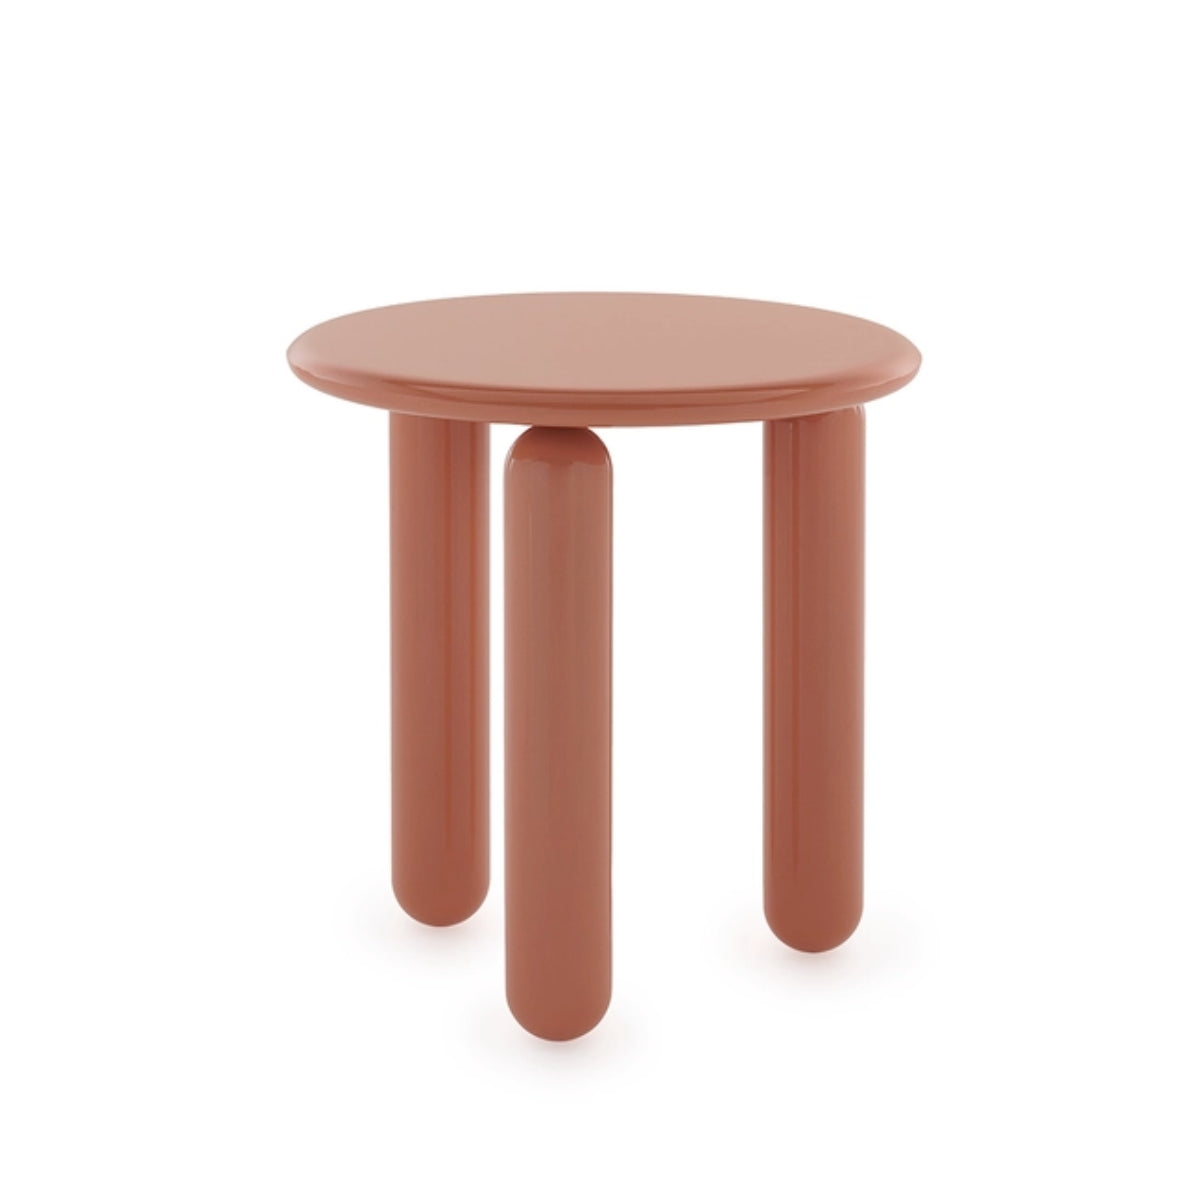 Undique Mas Table Small - Kartell